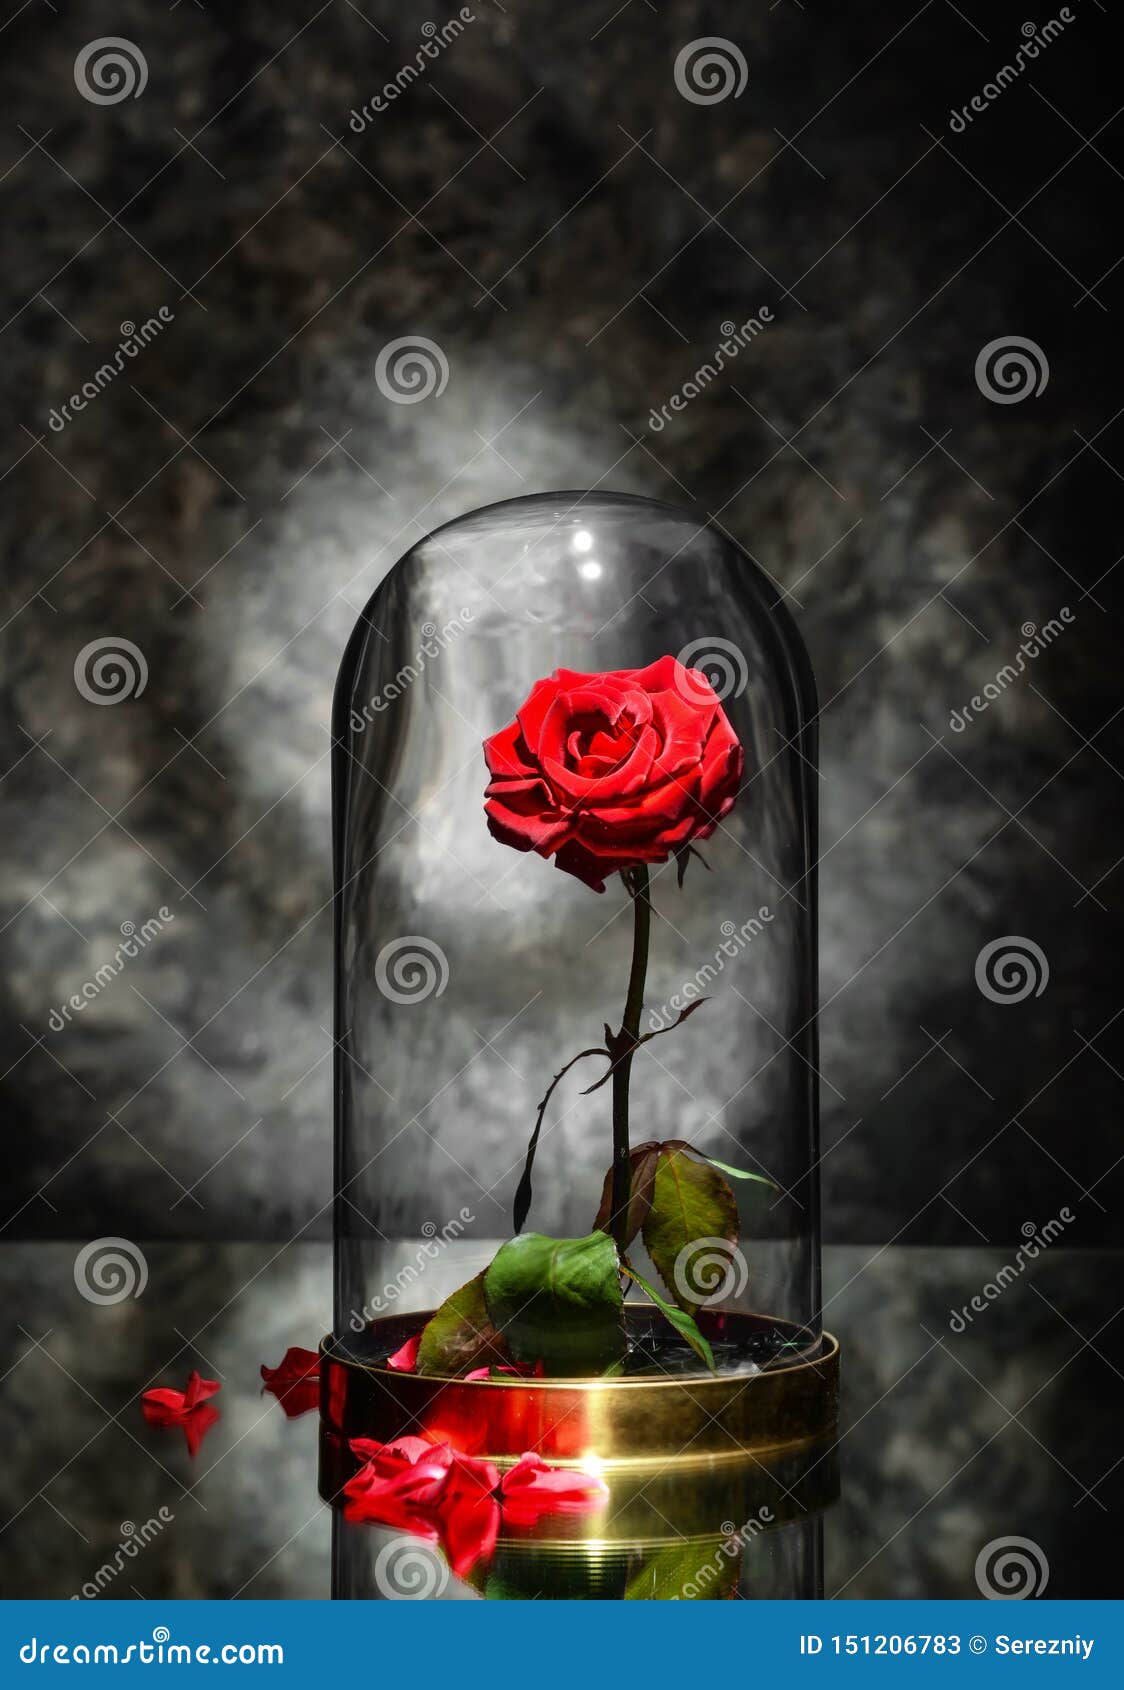 Beautiful Red Rose Under Glass Cap on Table Against Dark Grey ...